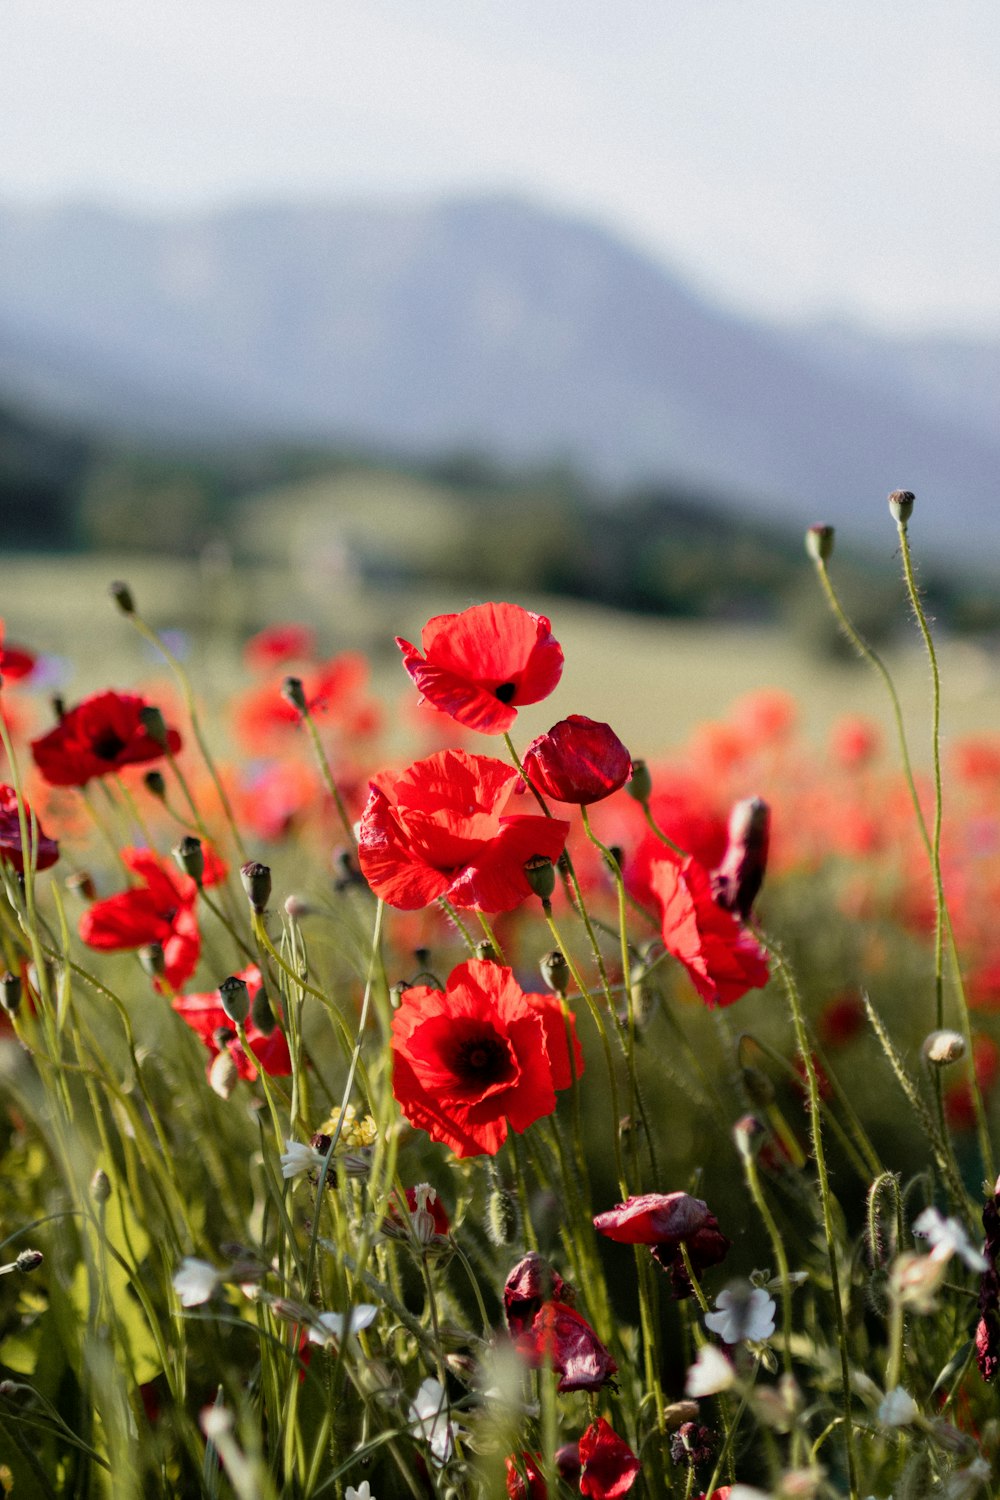 a field full of red flowers with mountains in the background